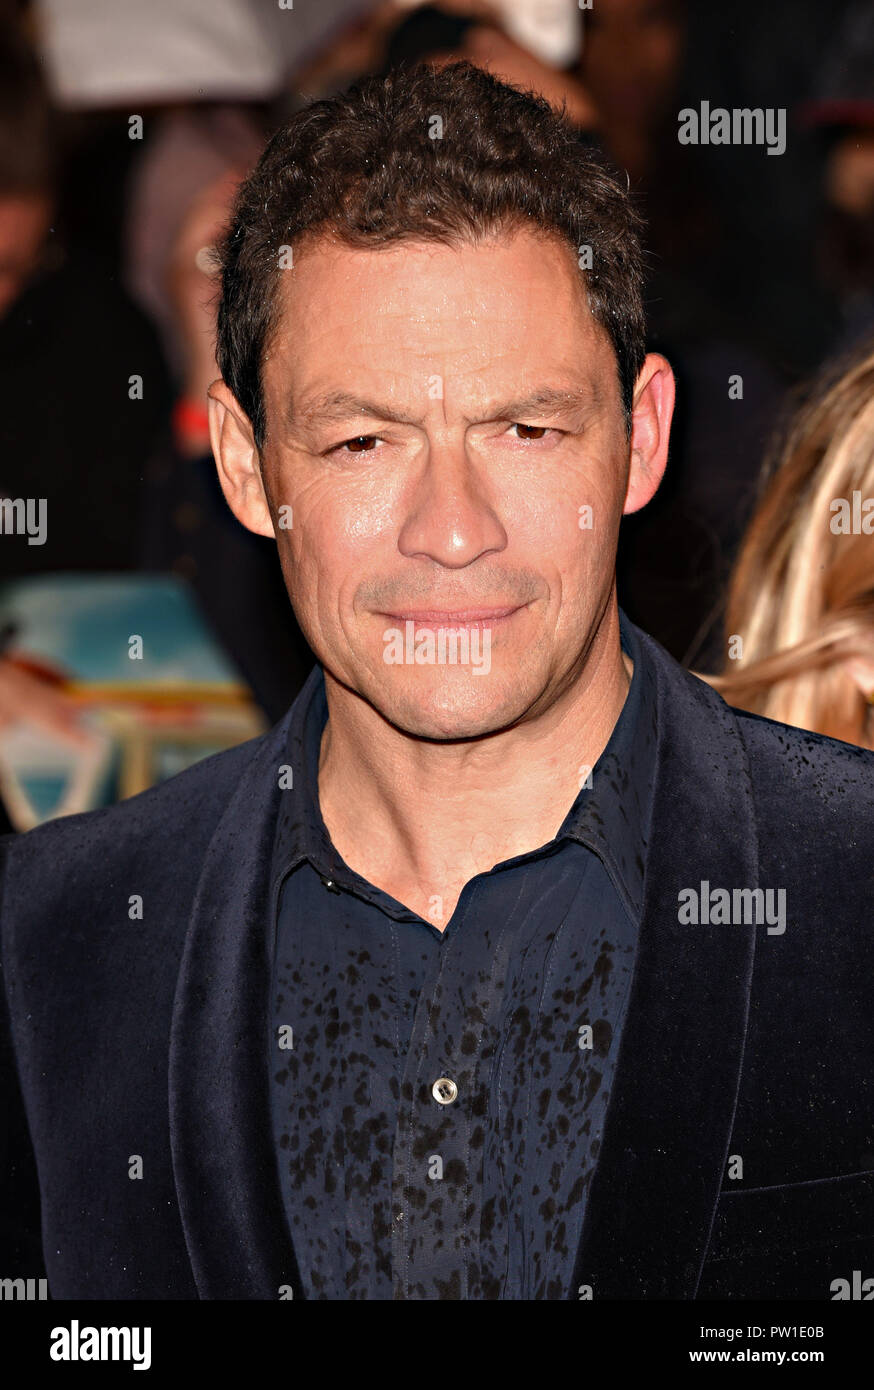 London, UK. 11th Oct 2018. Dominic West at the 62nd BFI London Film Festival: Colette - Patrons gala - at Cineworld Leicester Square, London on Thursday 11 October 2018  Photo by Keith Mayhew Credit: KEITH MAYHEW/Alamy Live News Stock Photo